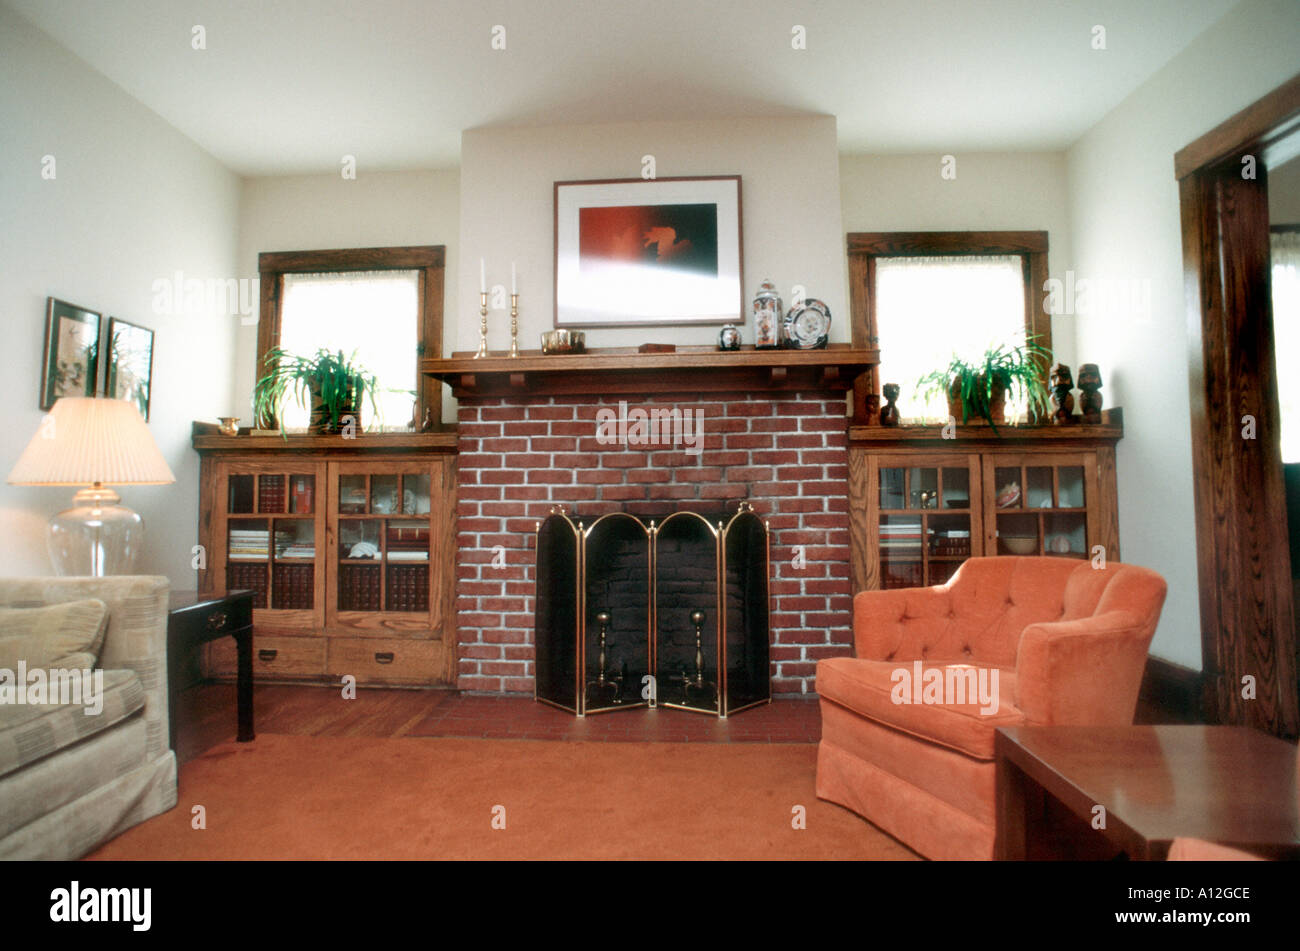 Investment USA American Homes 'Single Family House' Interior 1980s Living Room, Brick Fireplace, Home Stock Photo